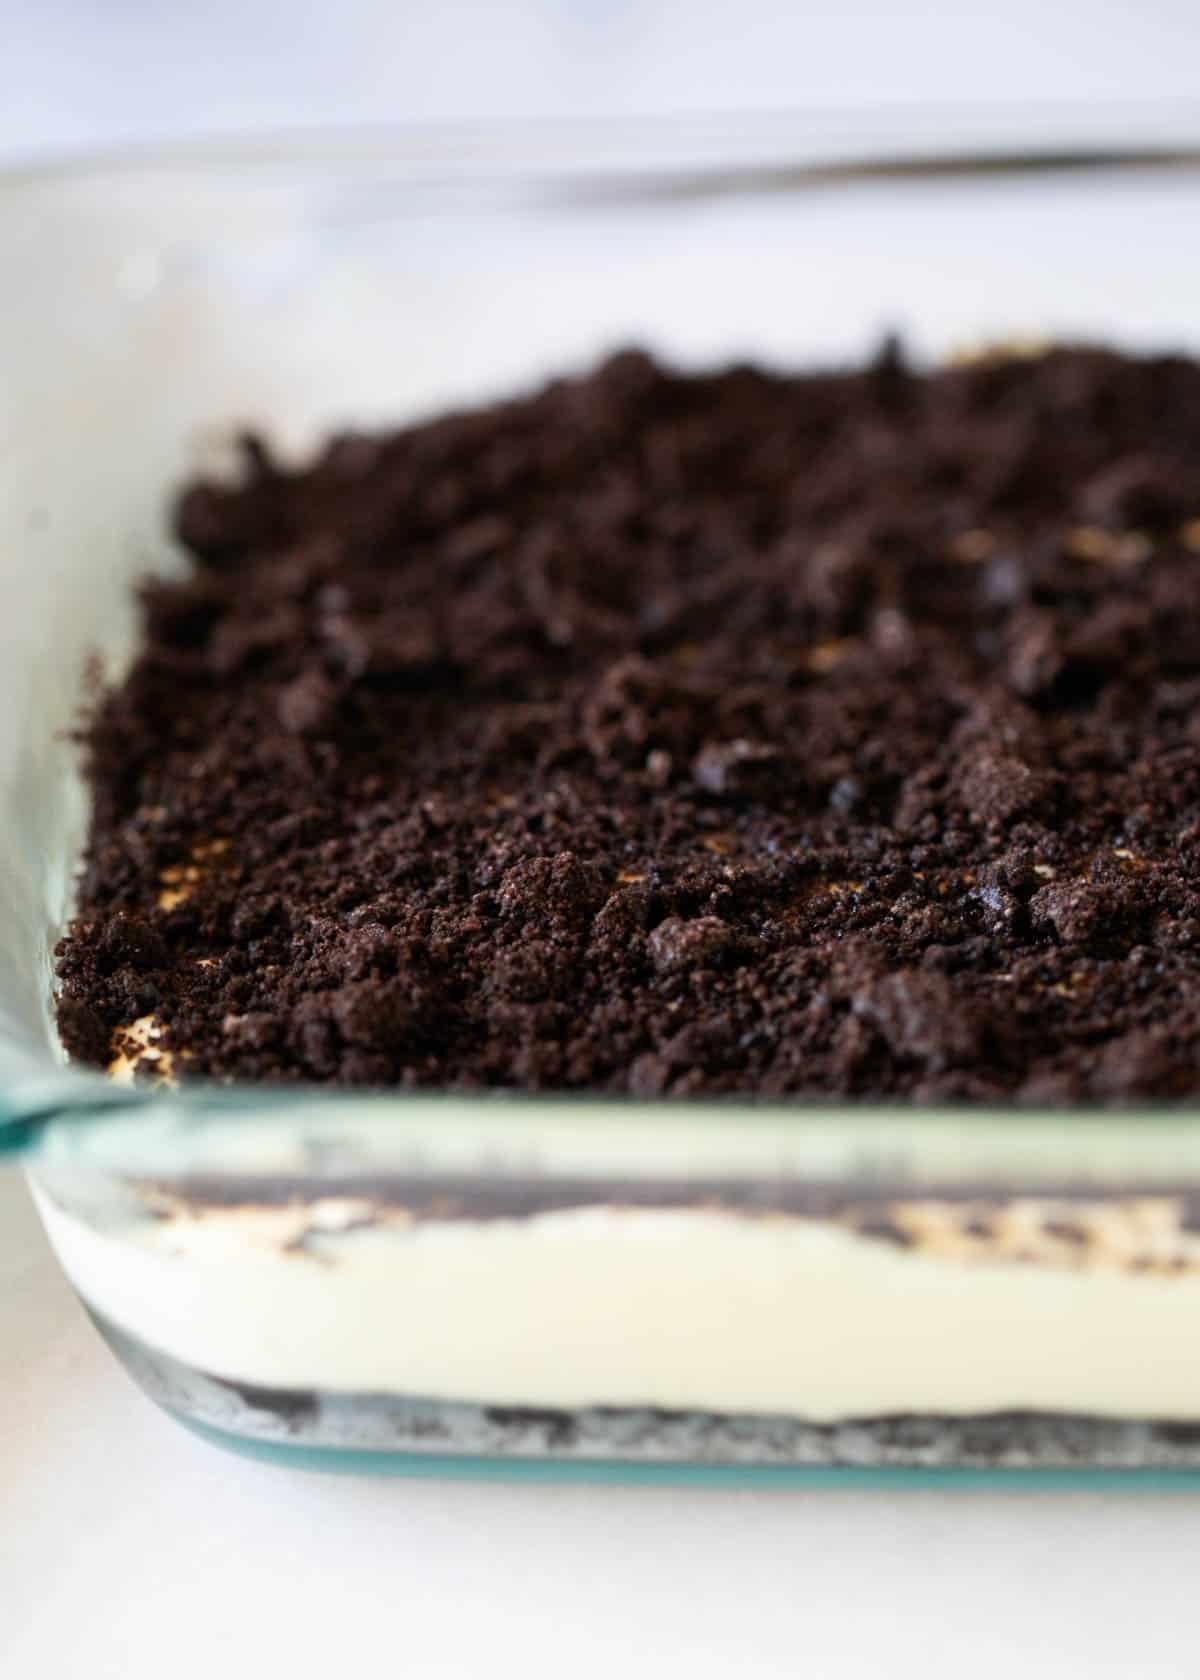 Oreo dirt cake in a glass dish.